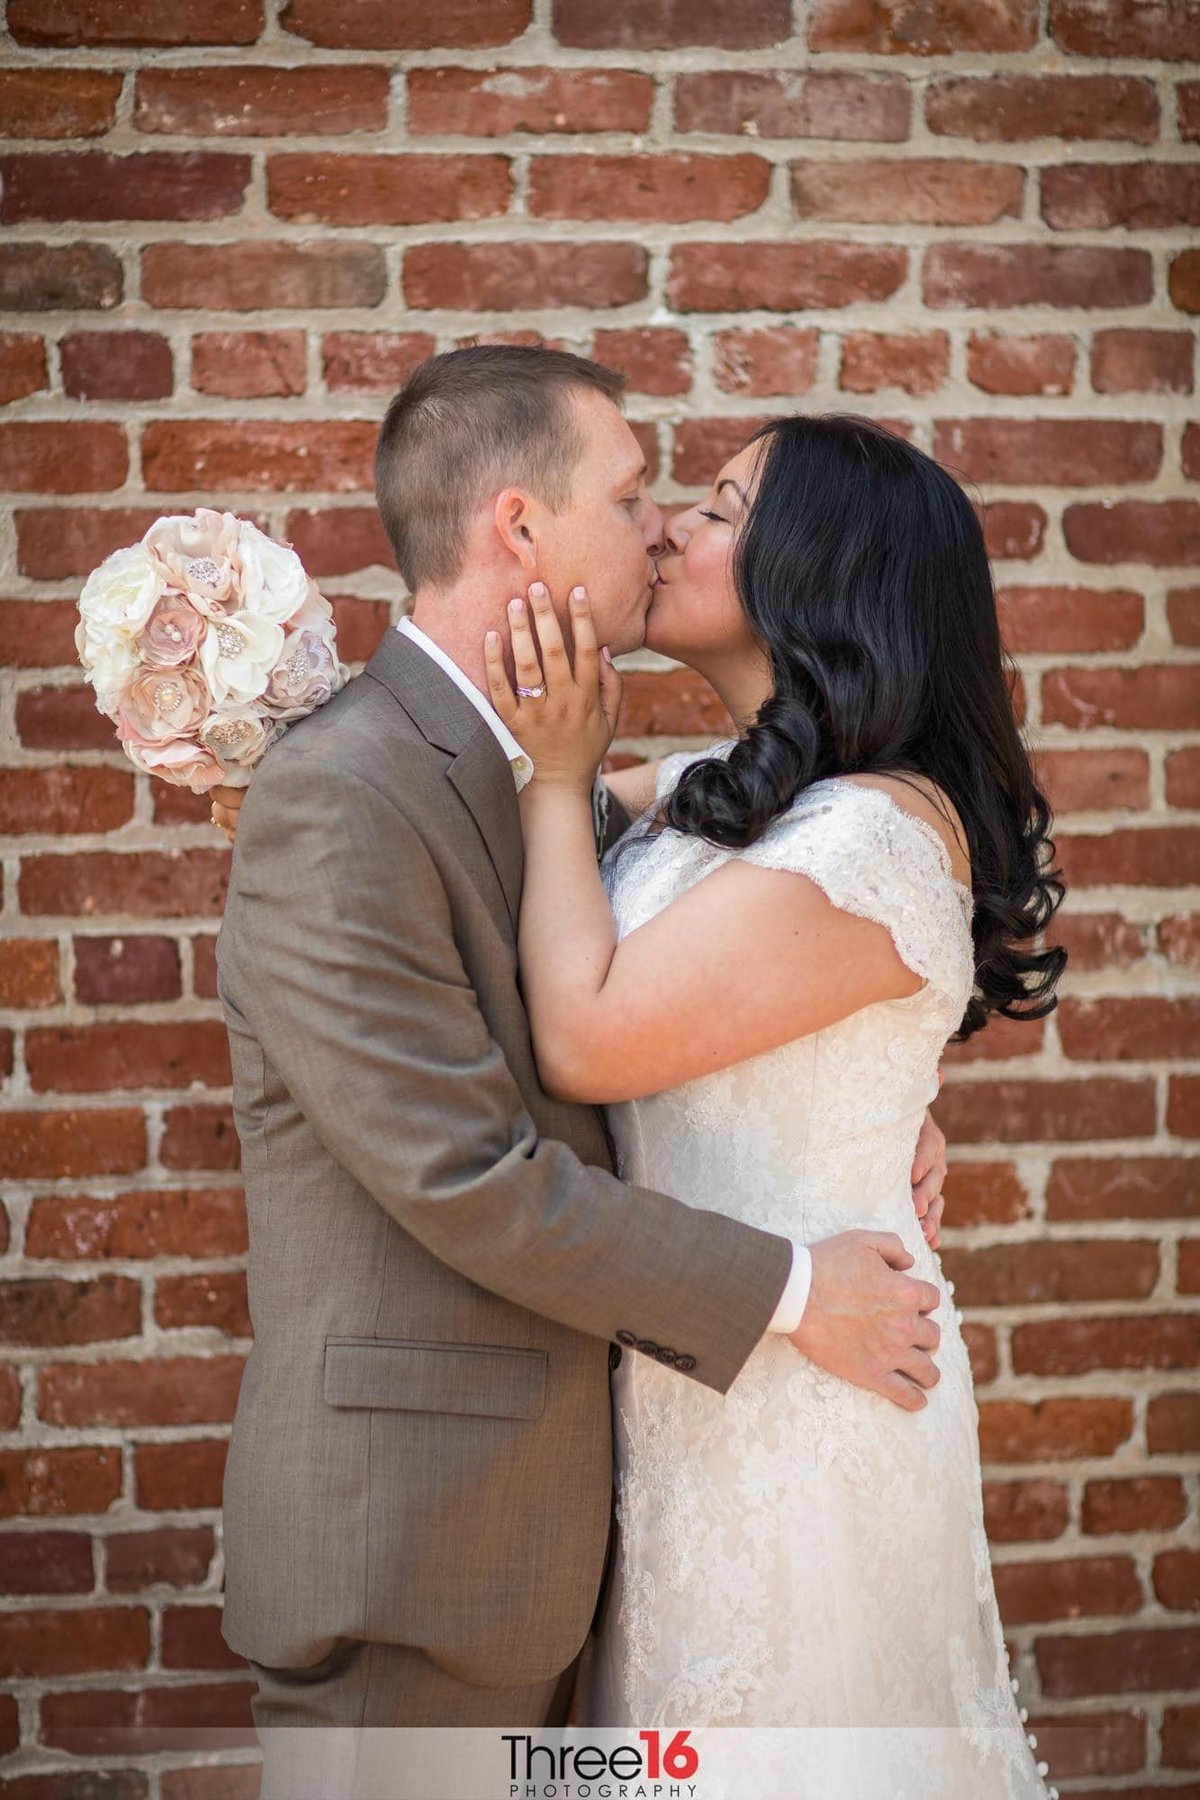 Bride and Groom share a sweet kiss after the ceremony when they have an alone moment together